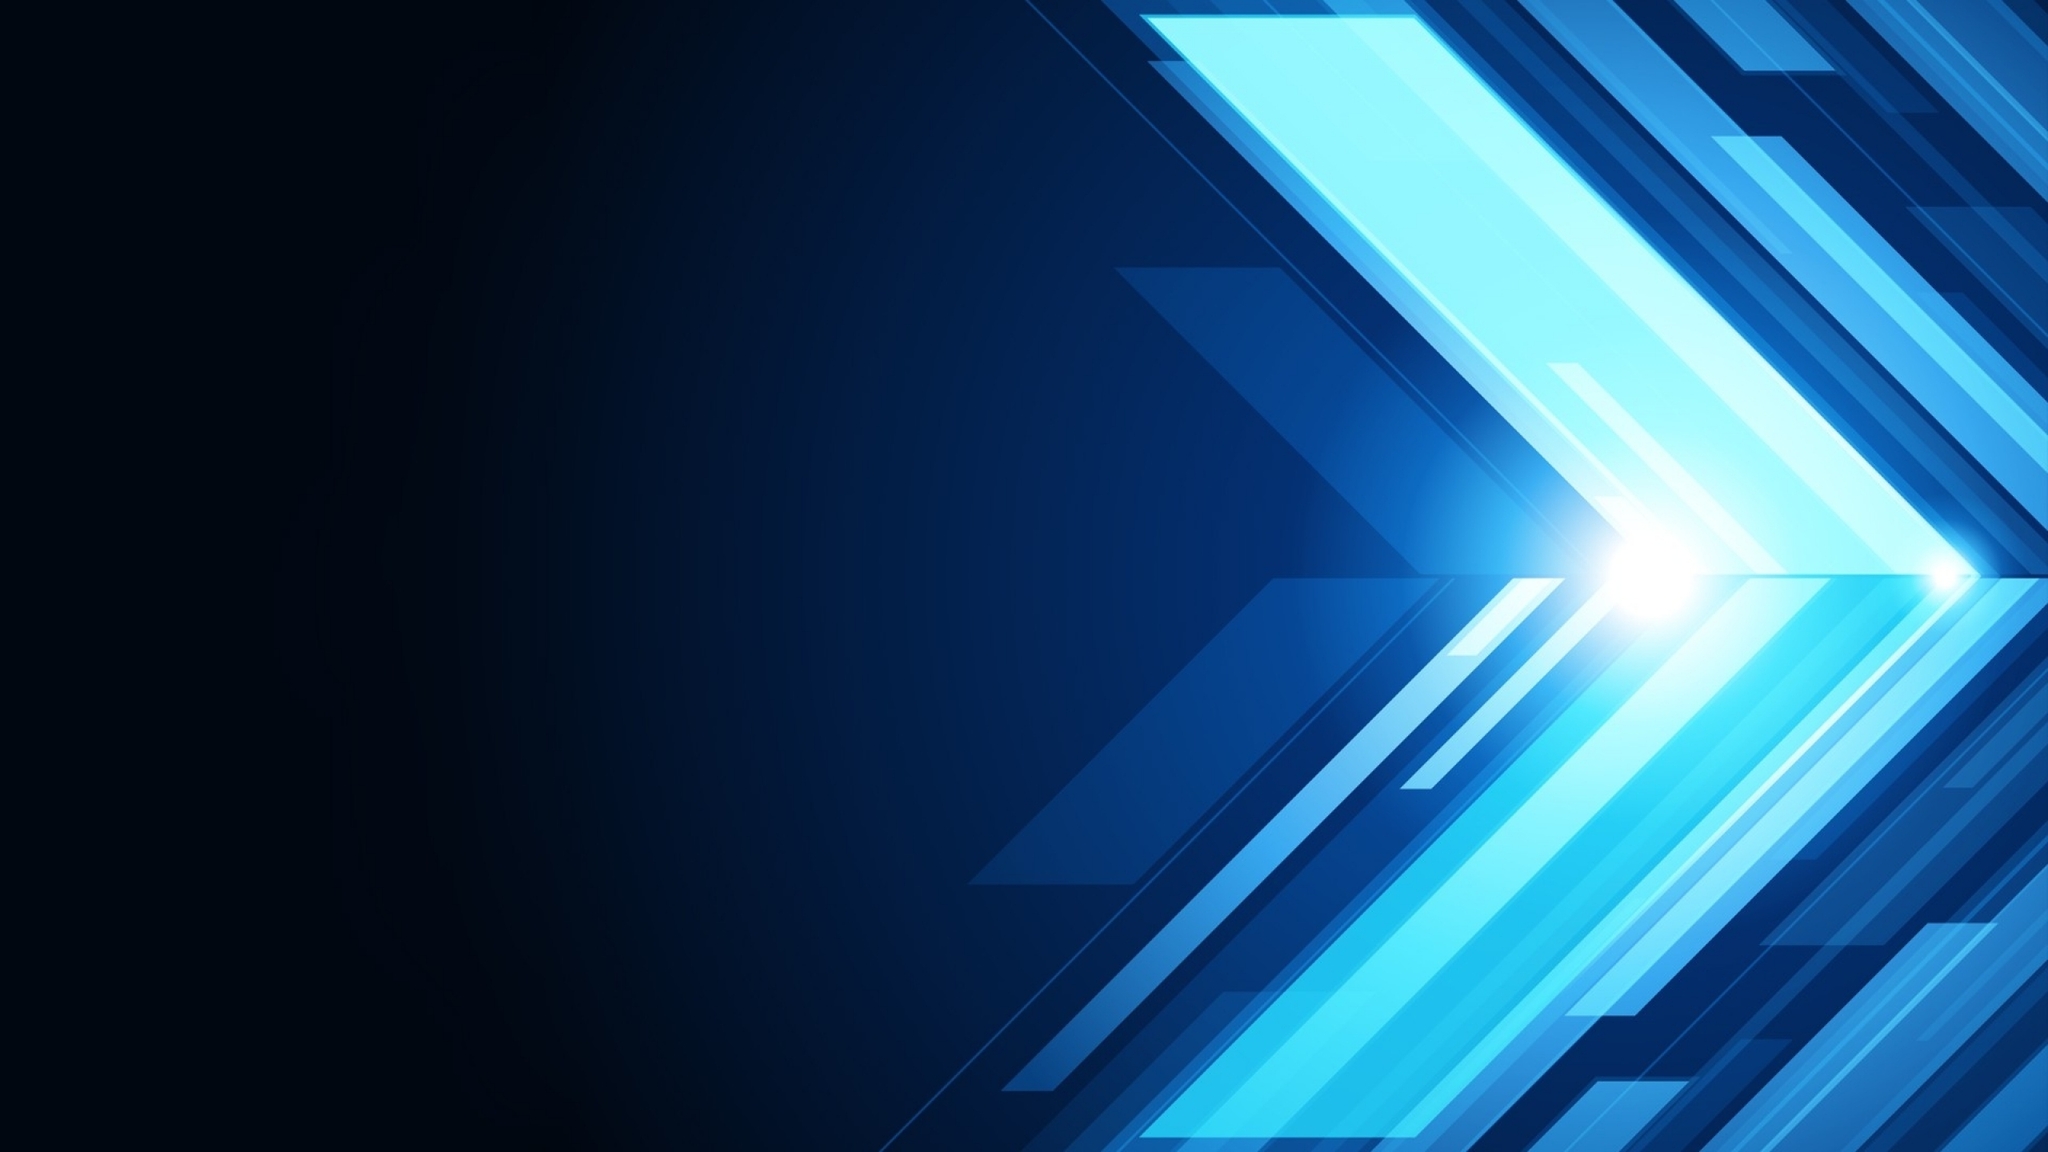 2048x1152 Blue Abstract Hd 2048x1152 Resolution Hd 4k Wallpapers Images Backgrounds Photos And Pictures